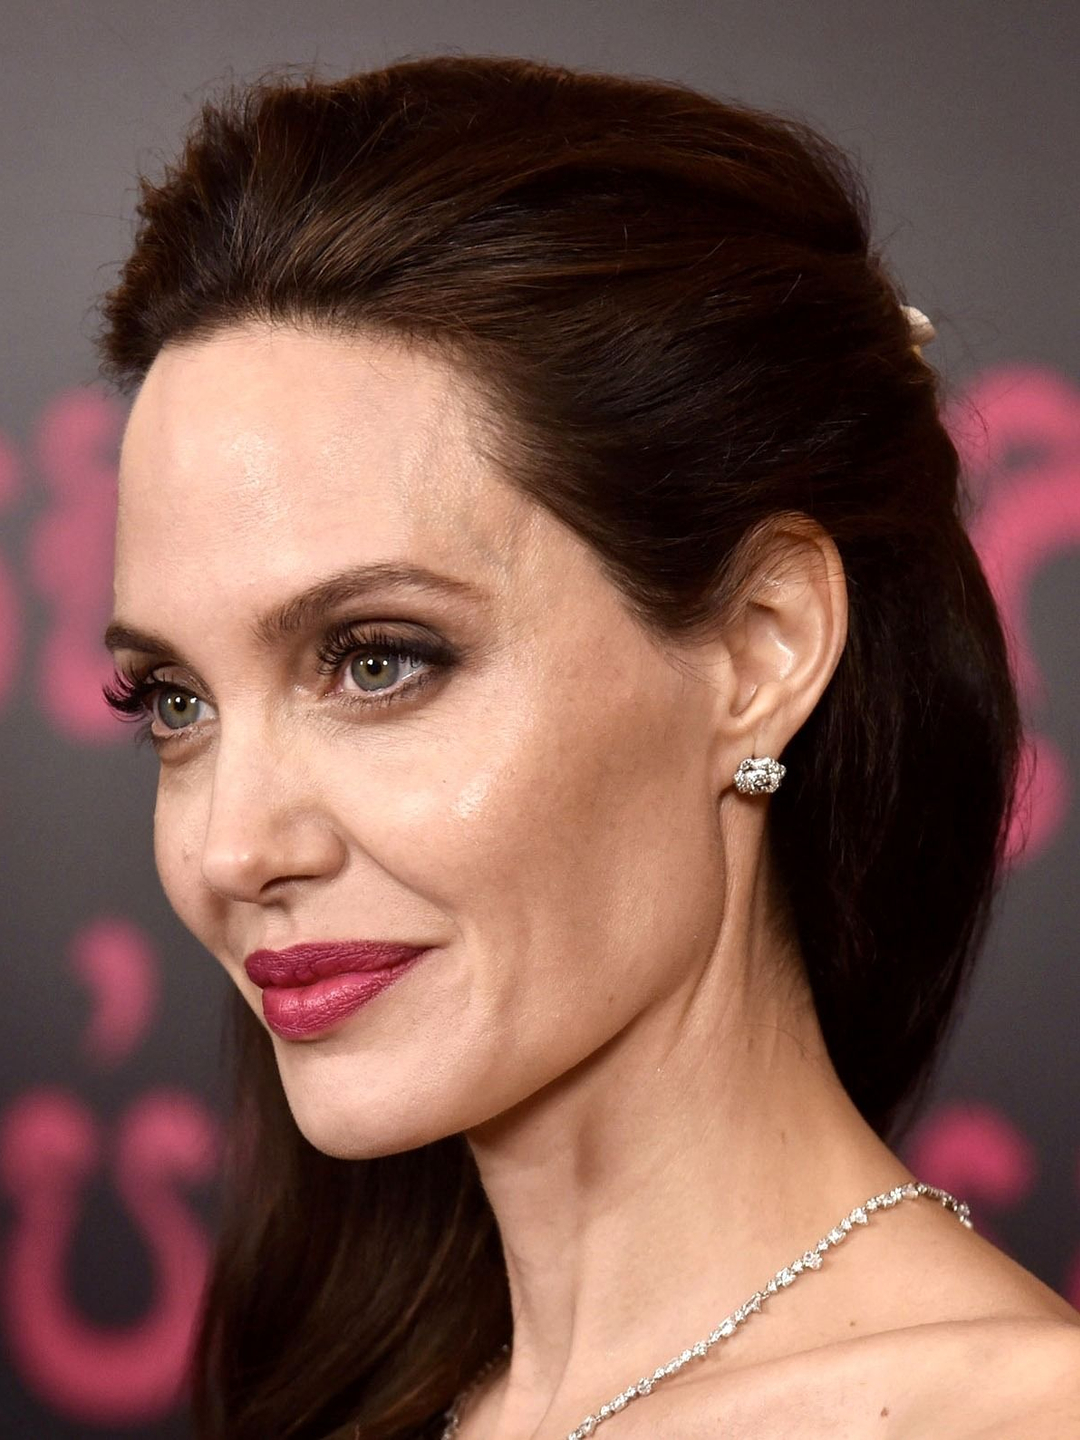 Angelina Jolie who are her parents